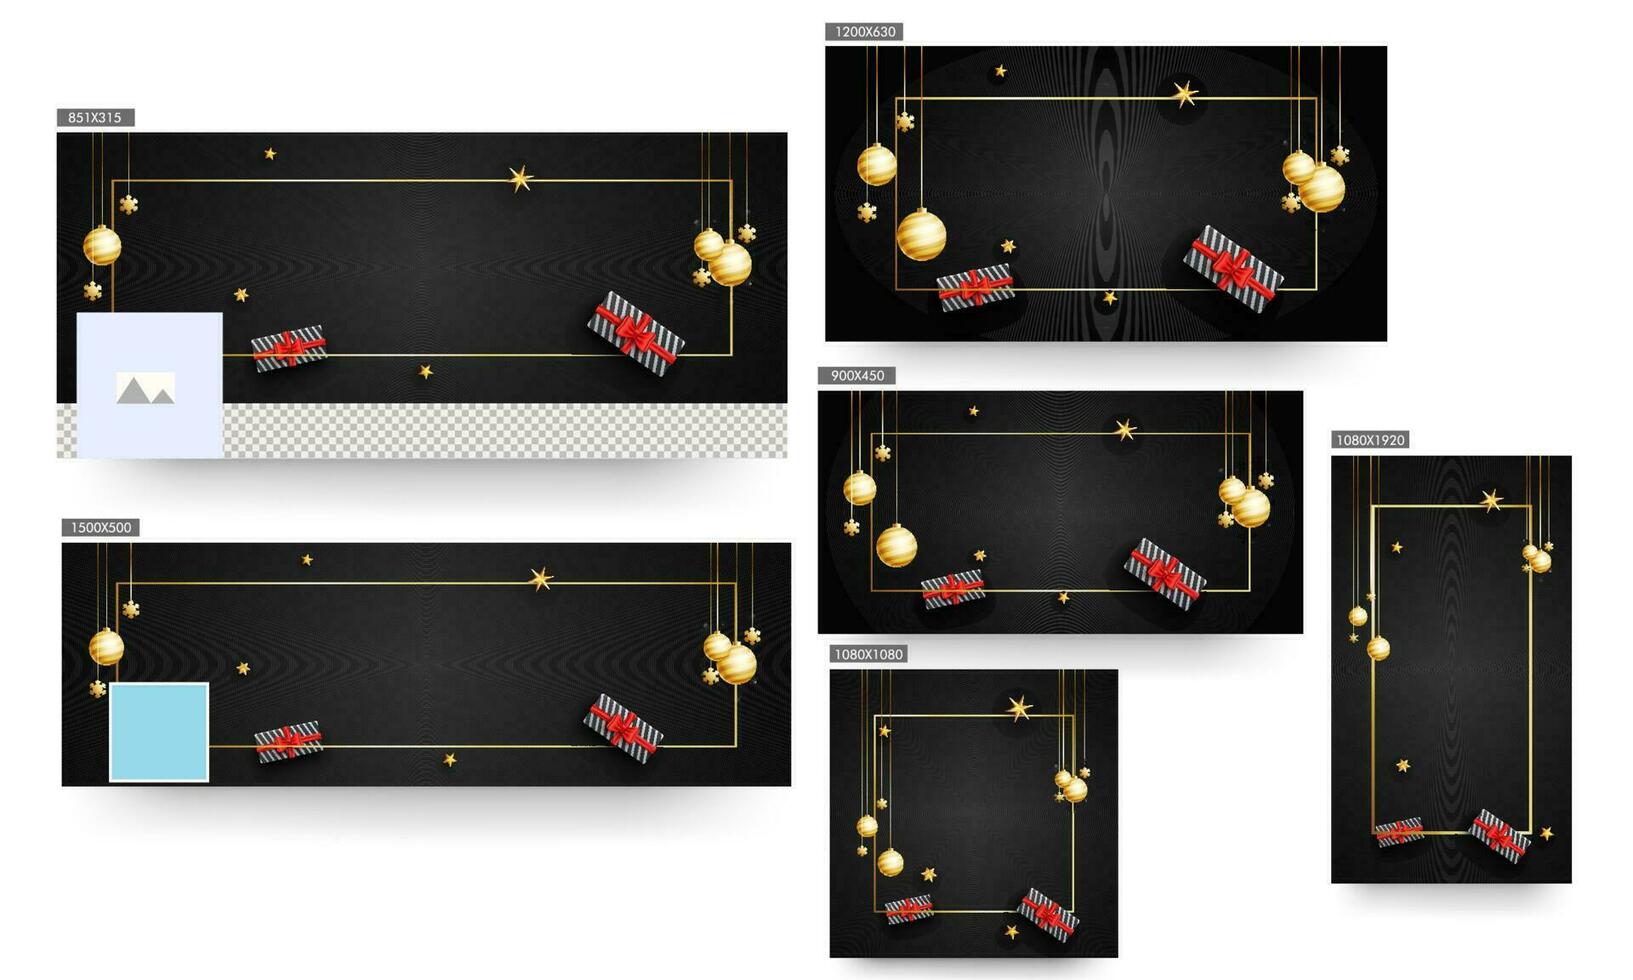 Header or Banner, Poster and Template Design with Gift Boxes, Hanging Golden Baubles, Stars and Snowflakes Decorated on Black Background with Space for your message. vector